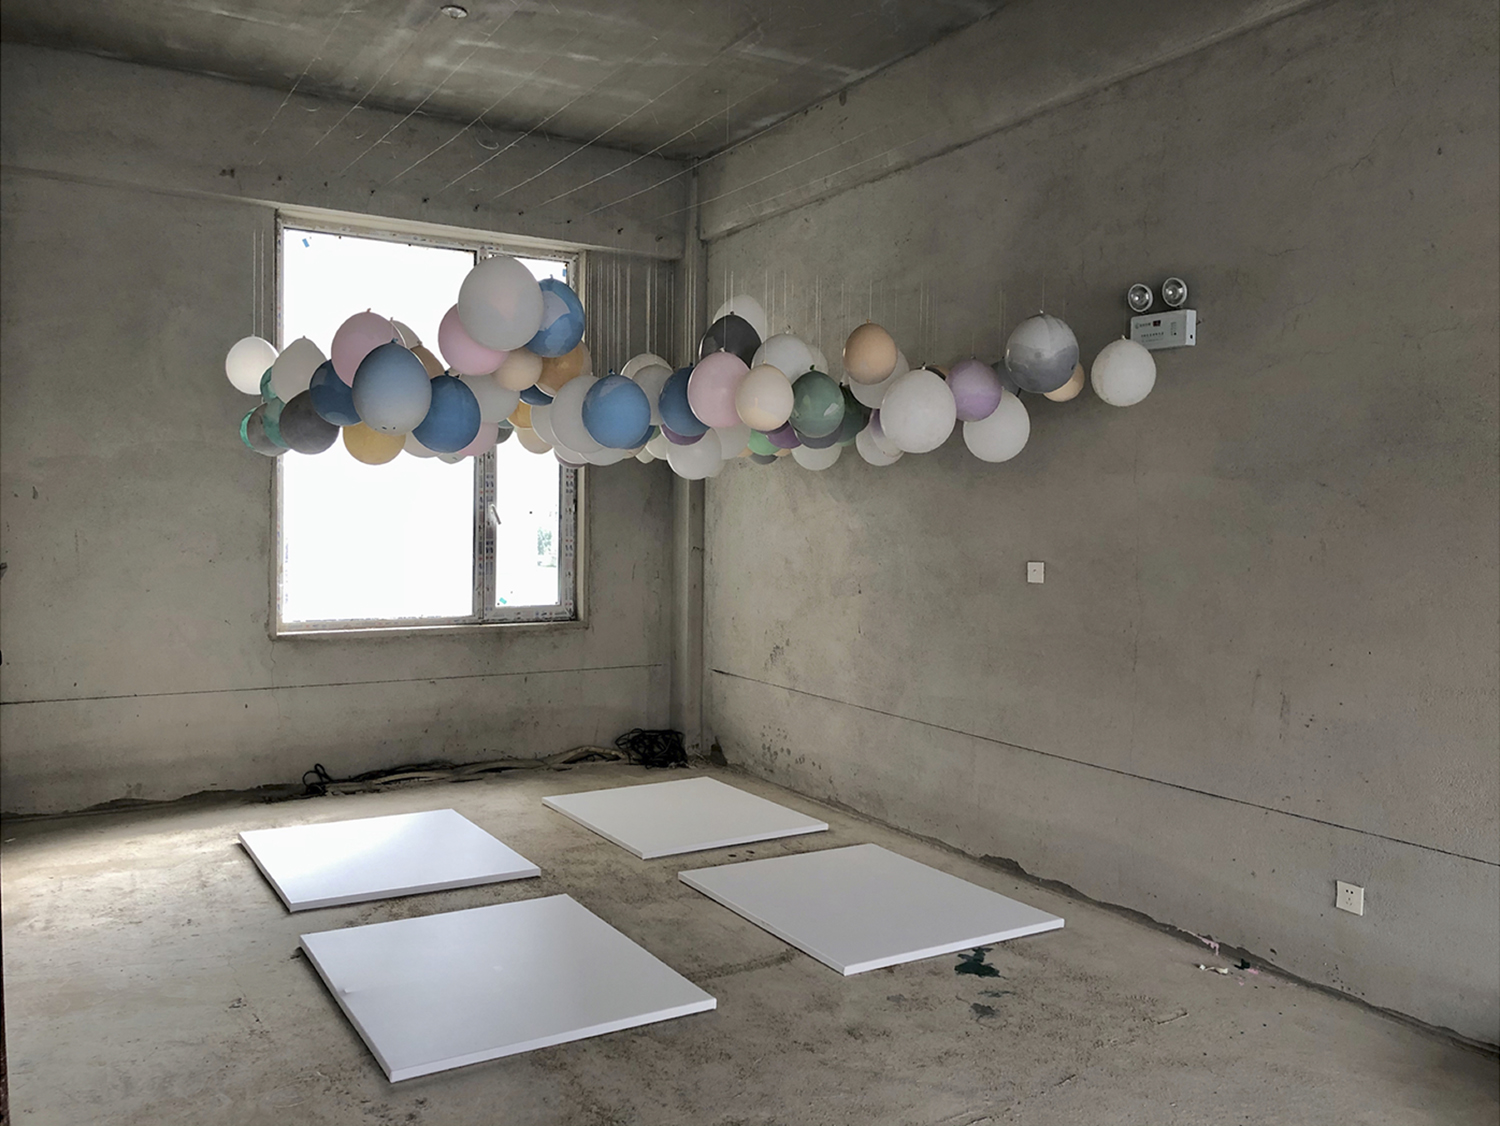 an artists studio - suspended balloons filled with paint